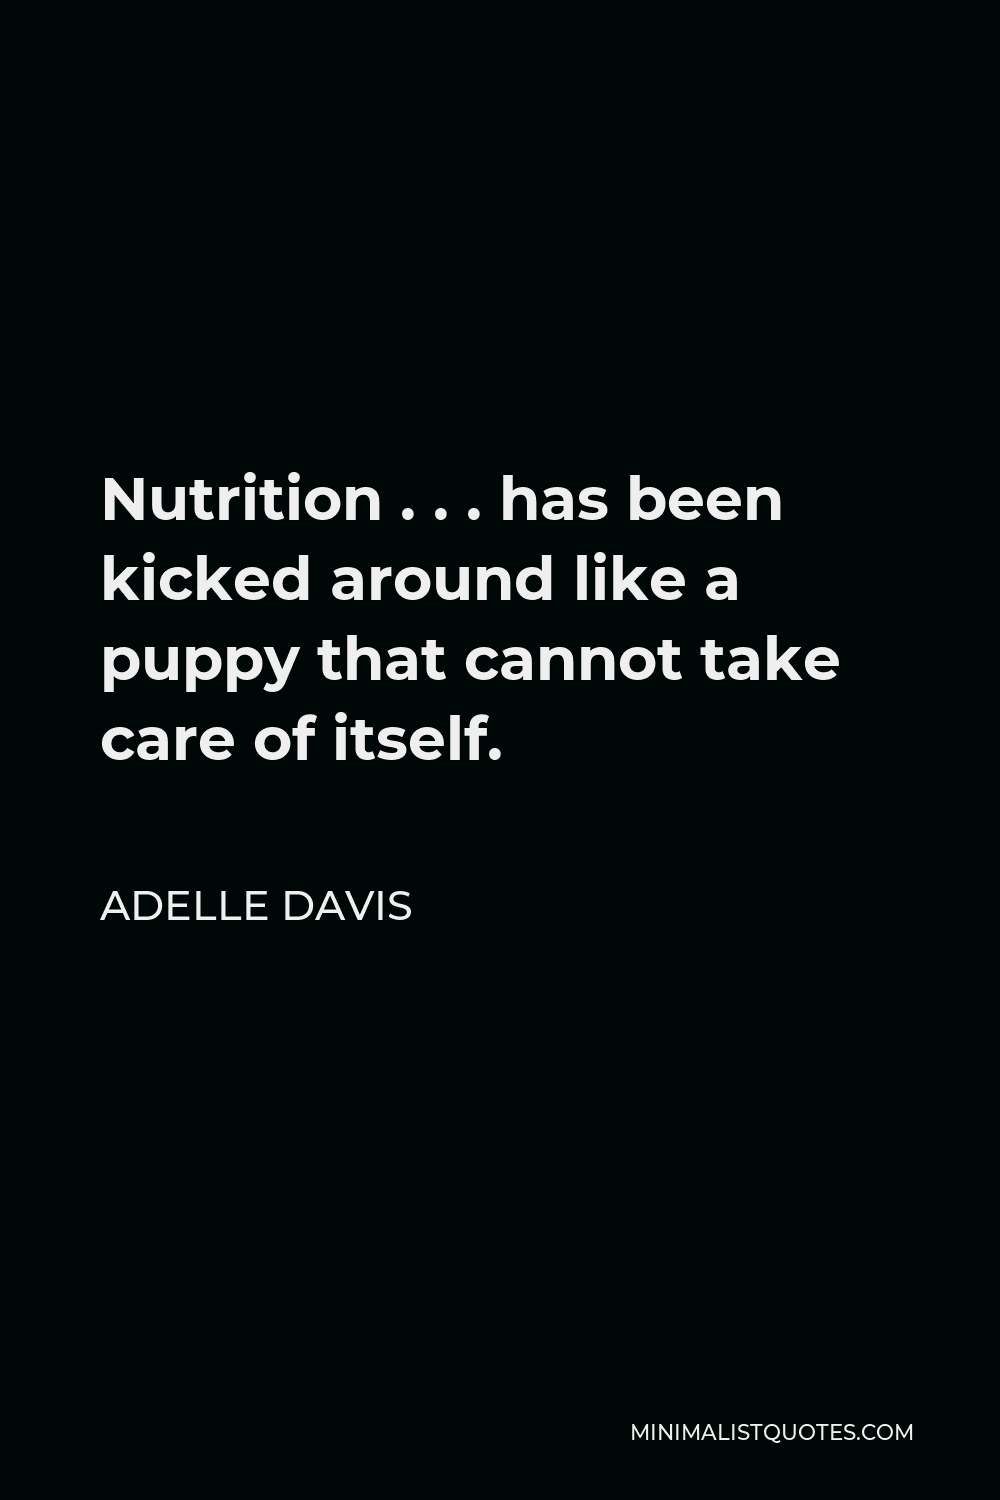 Adelle Davis Quote - Nutrition . . . has been kicked around like a puppy that cannot take care of itself.